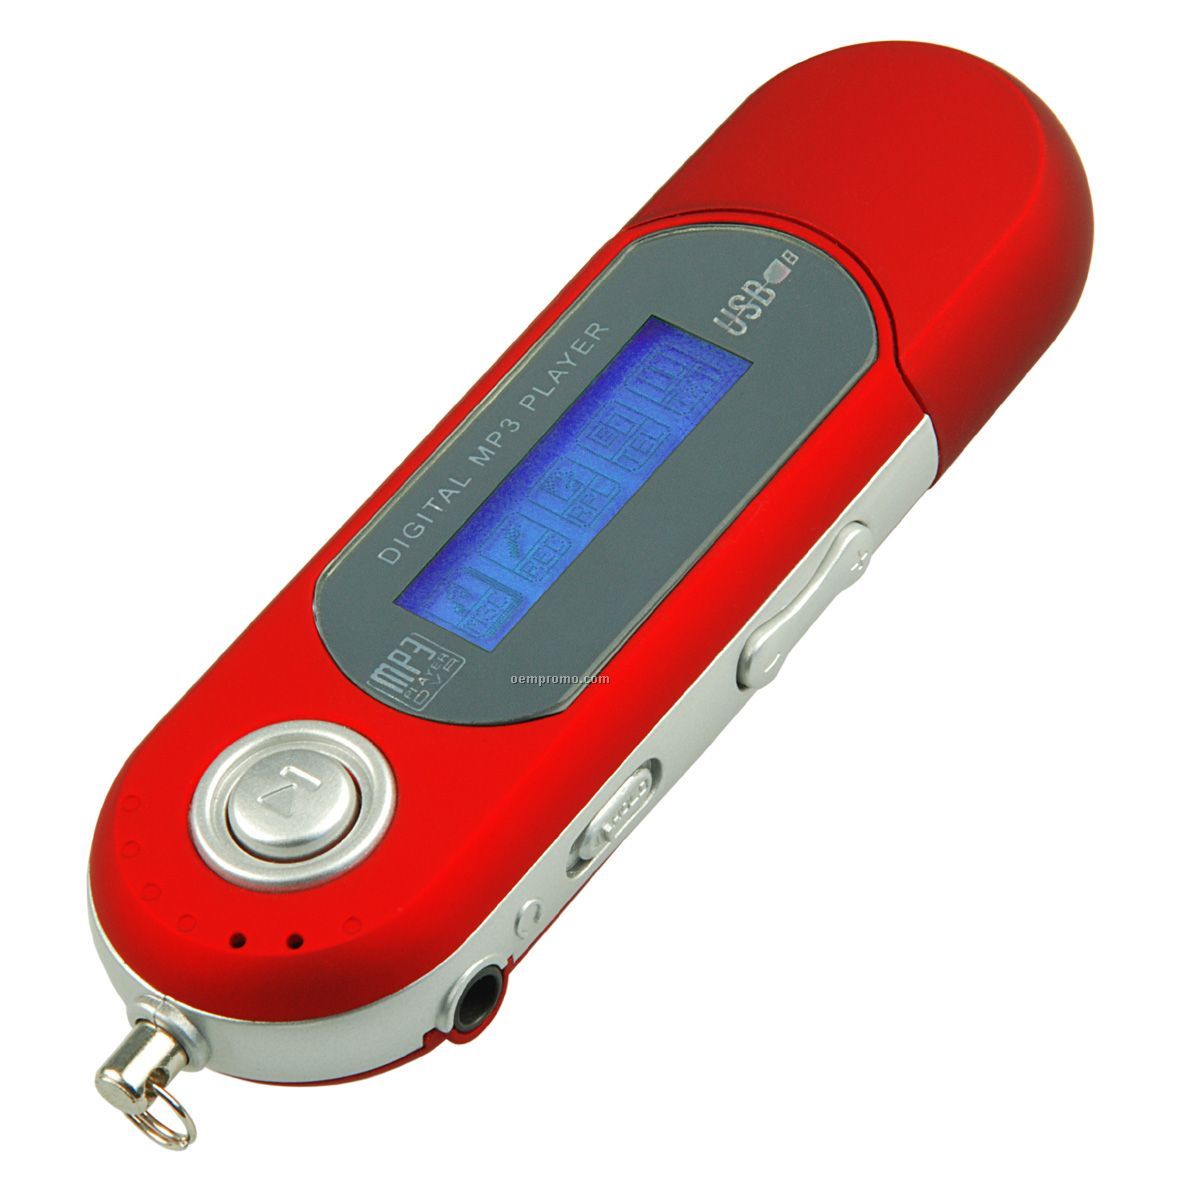 Mp3 Player With Curved Ends (4 Gb)